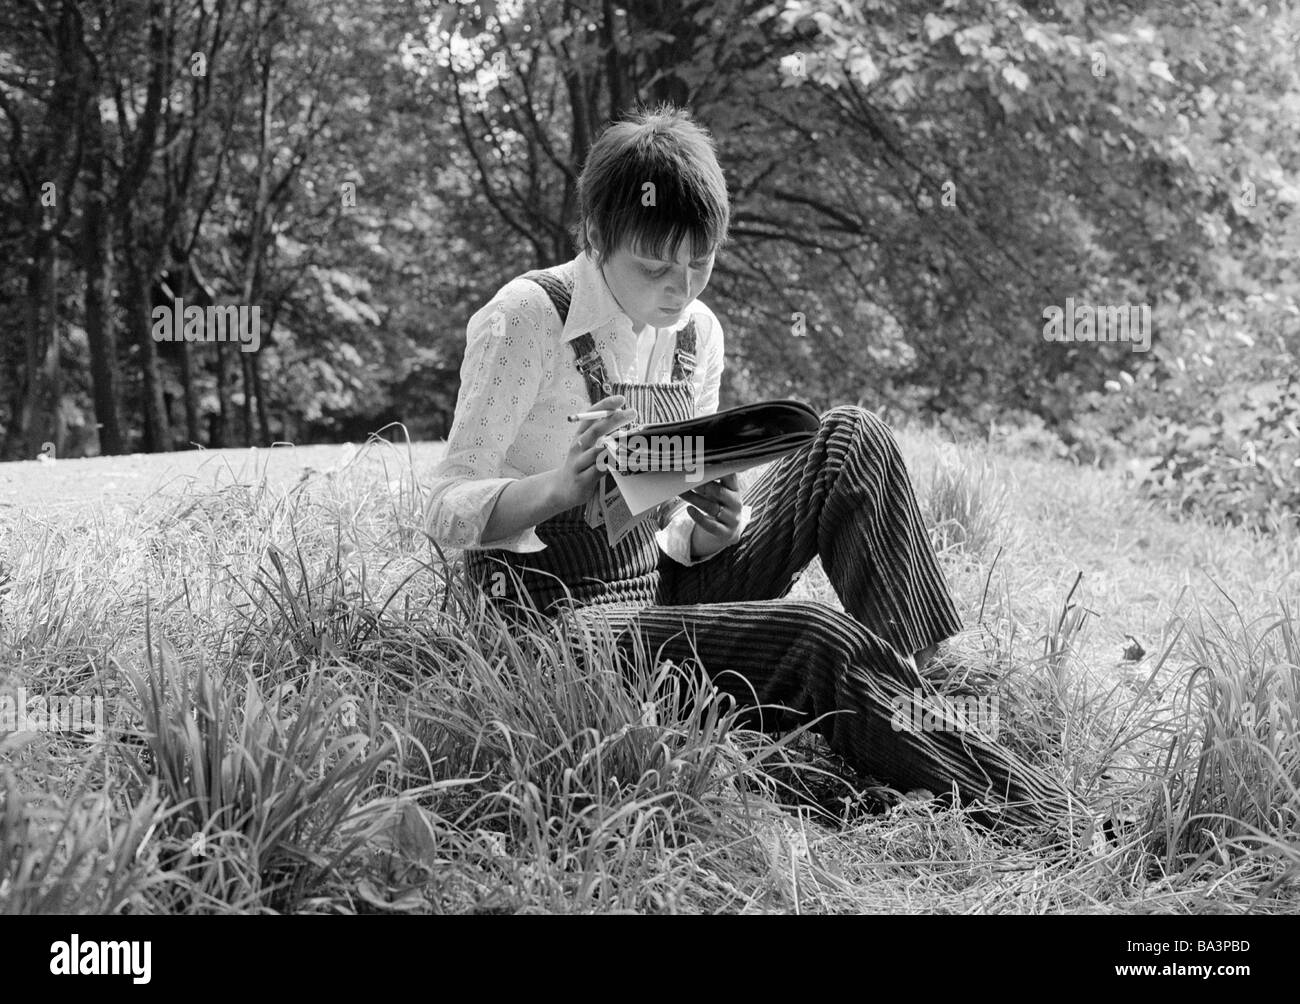 Seventies, black and white photo, people, young woman sits on a meadow reading a magazine, cigarette, rest, blouse, trousersuit, aged 25 to 30 years, Monika Stock Photo